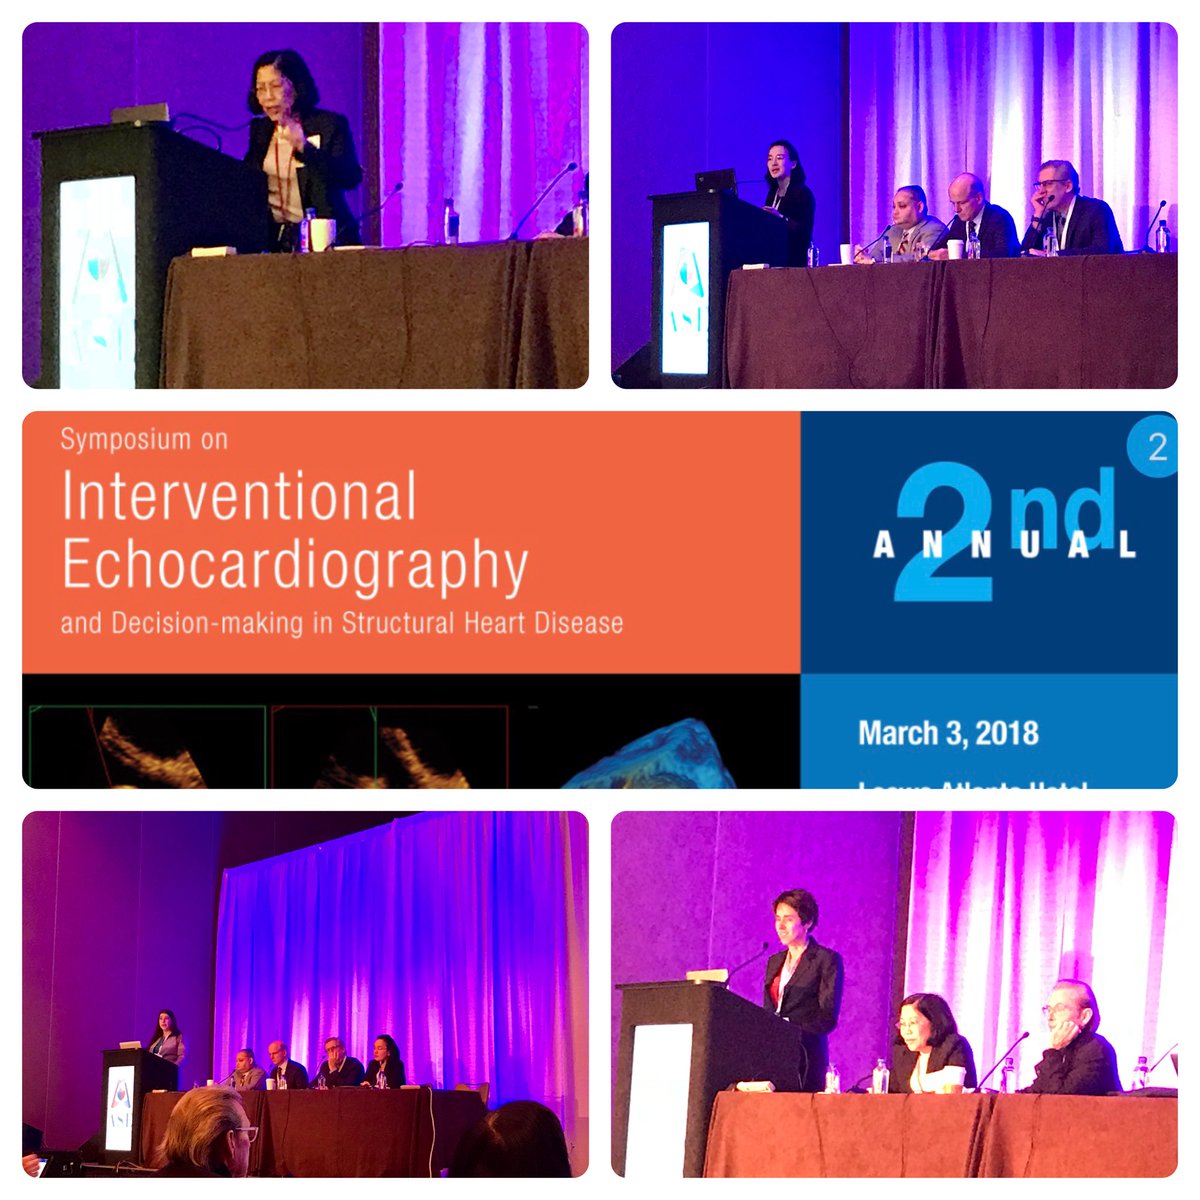 Completely blown away by the women who spoke at today’s @ASE360 Interventional Echocardiography conference. True masters of their craft! #IE2018 #womeninecho #WomenInMedicine #rolemodels #leanin #sheforshe